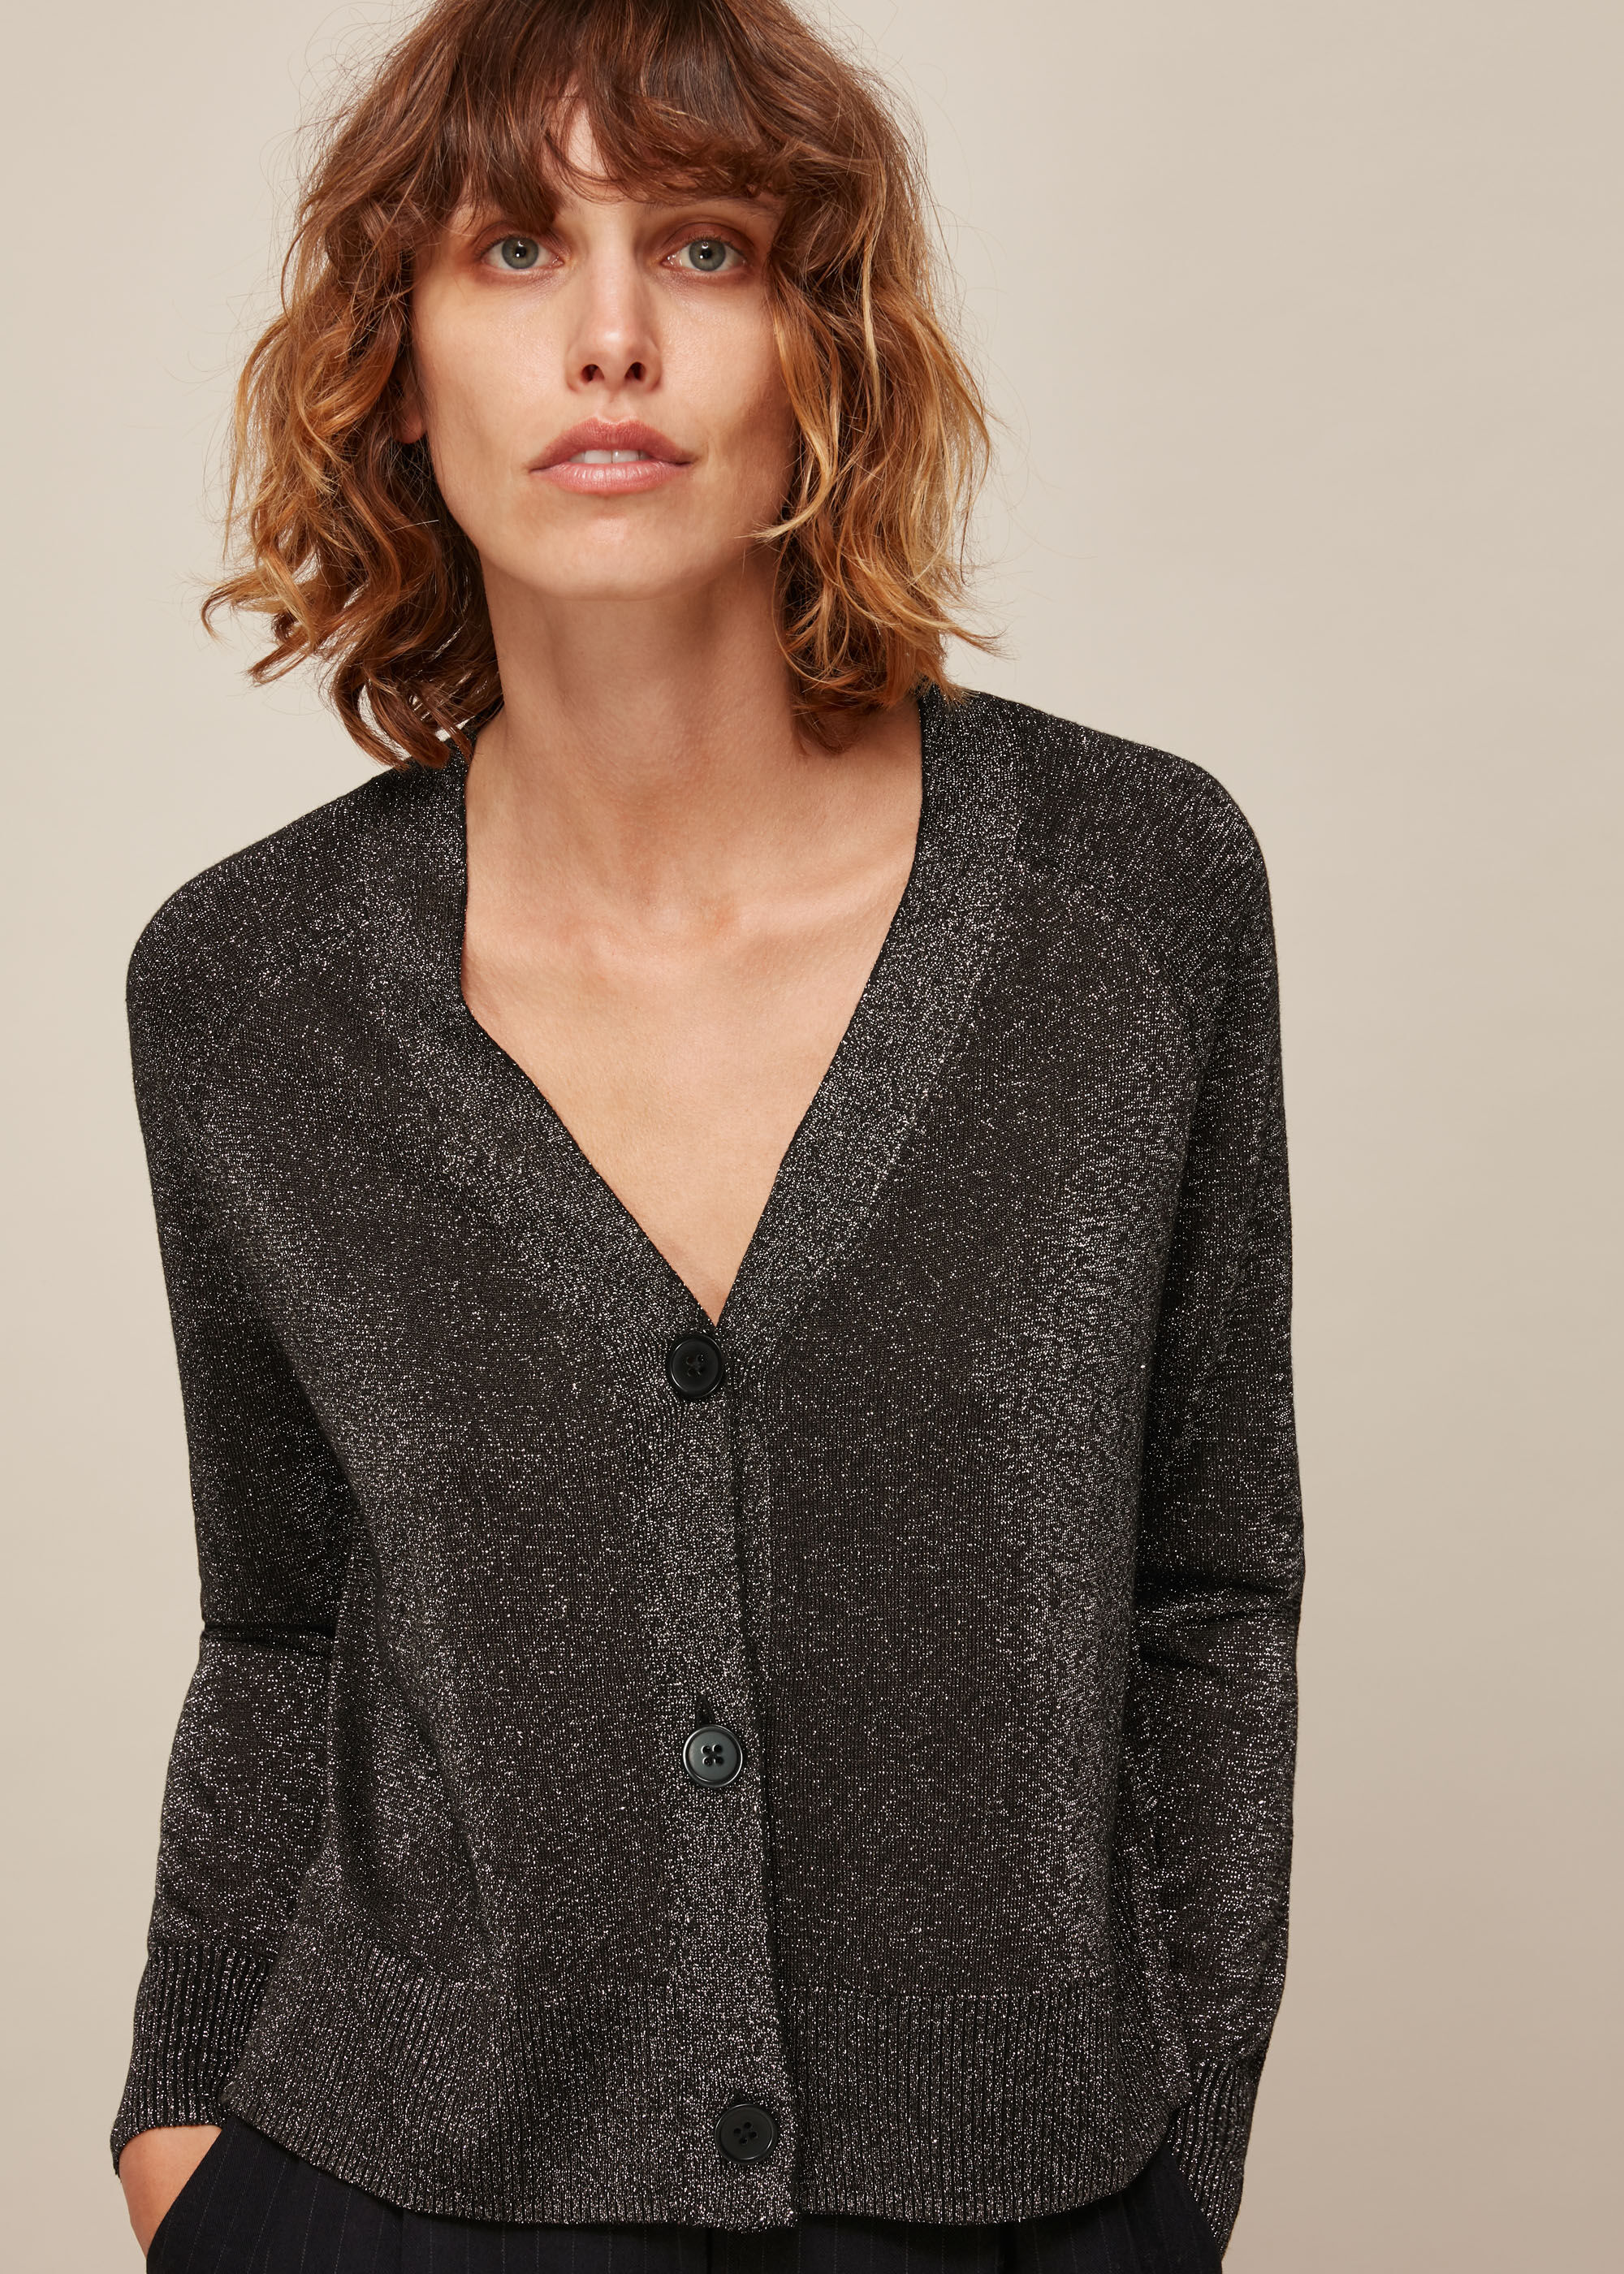 Silver Sparkle Button Front Cardigan | WHISTLES |